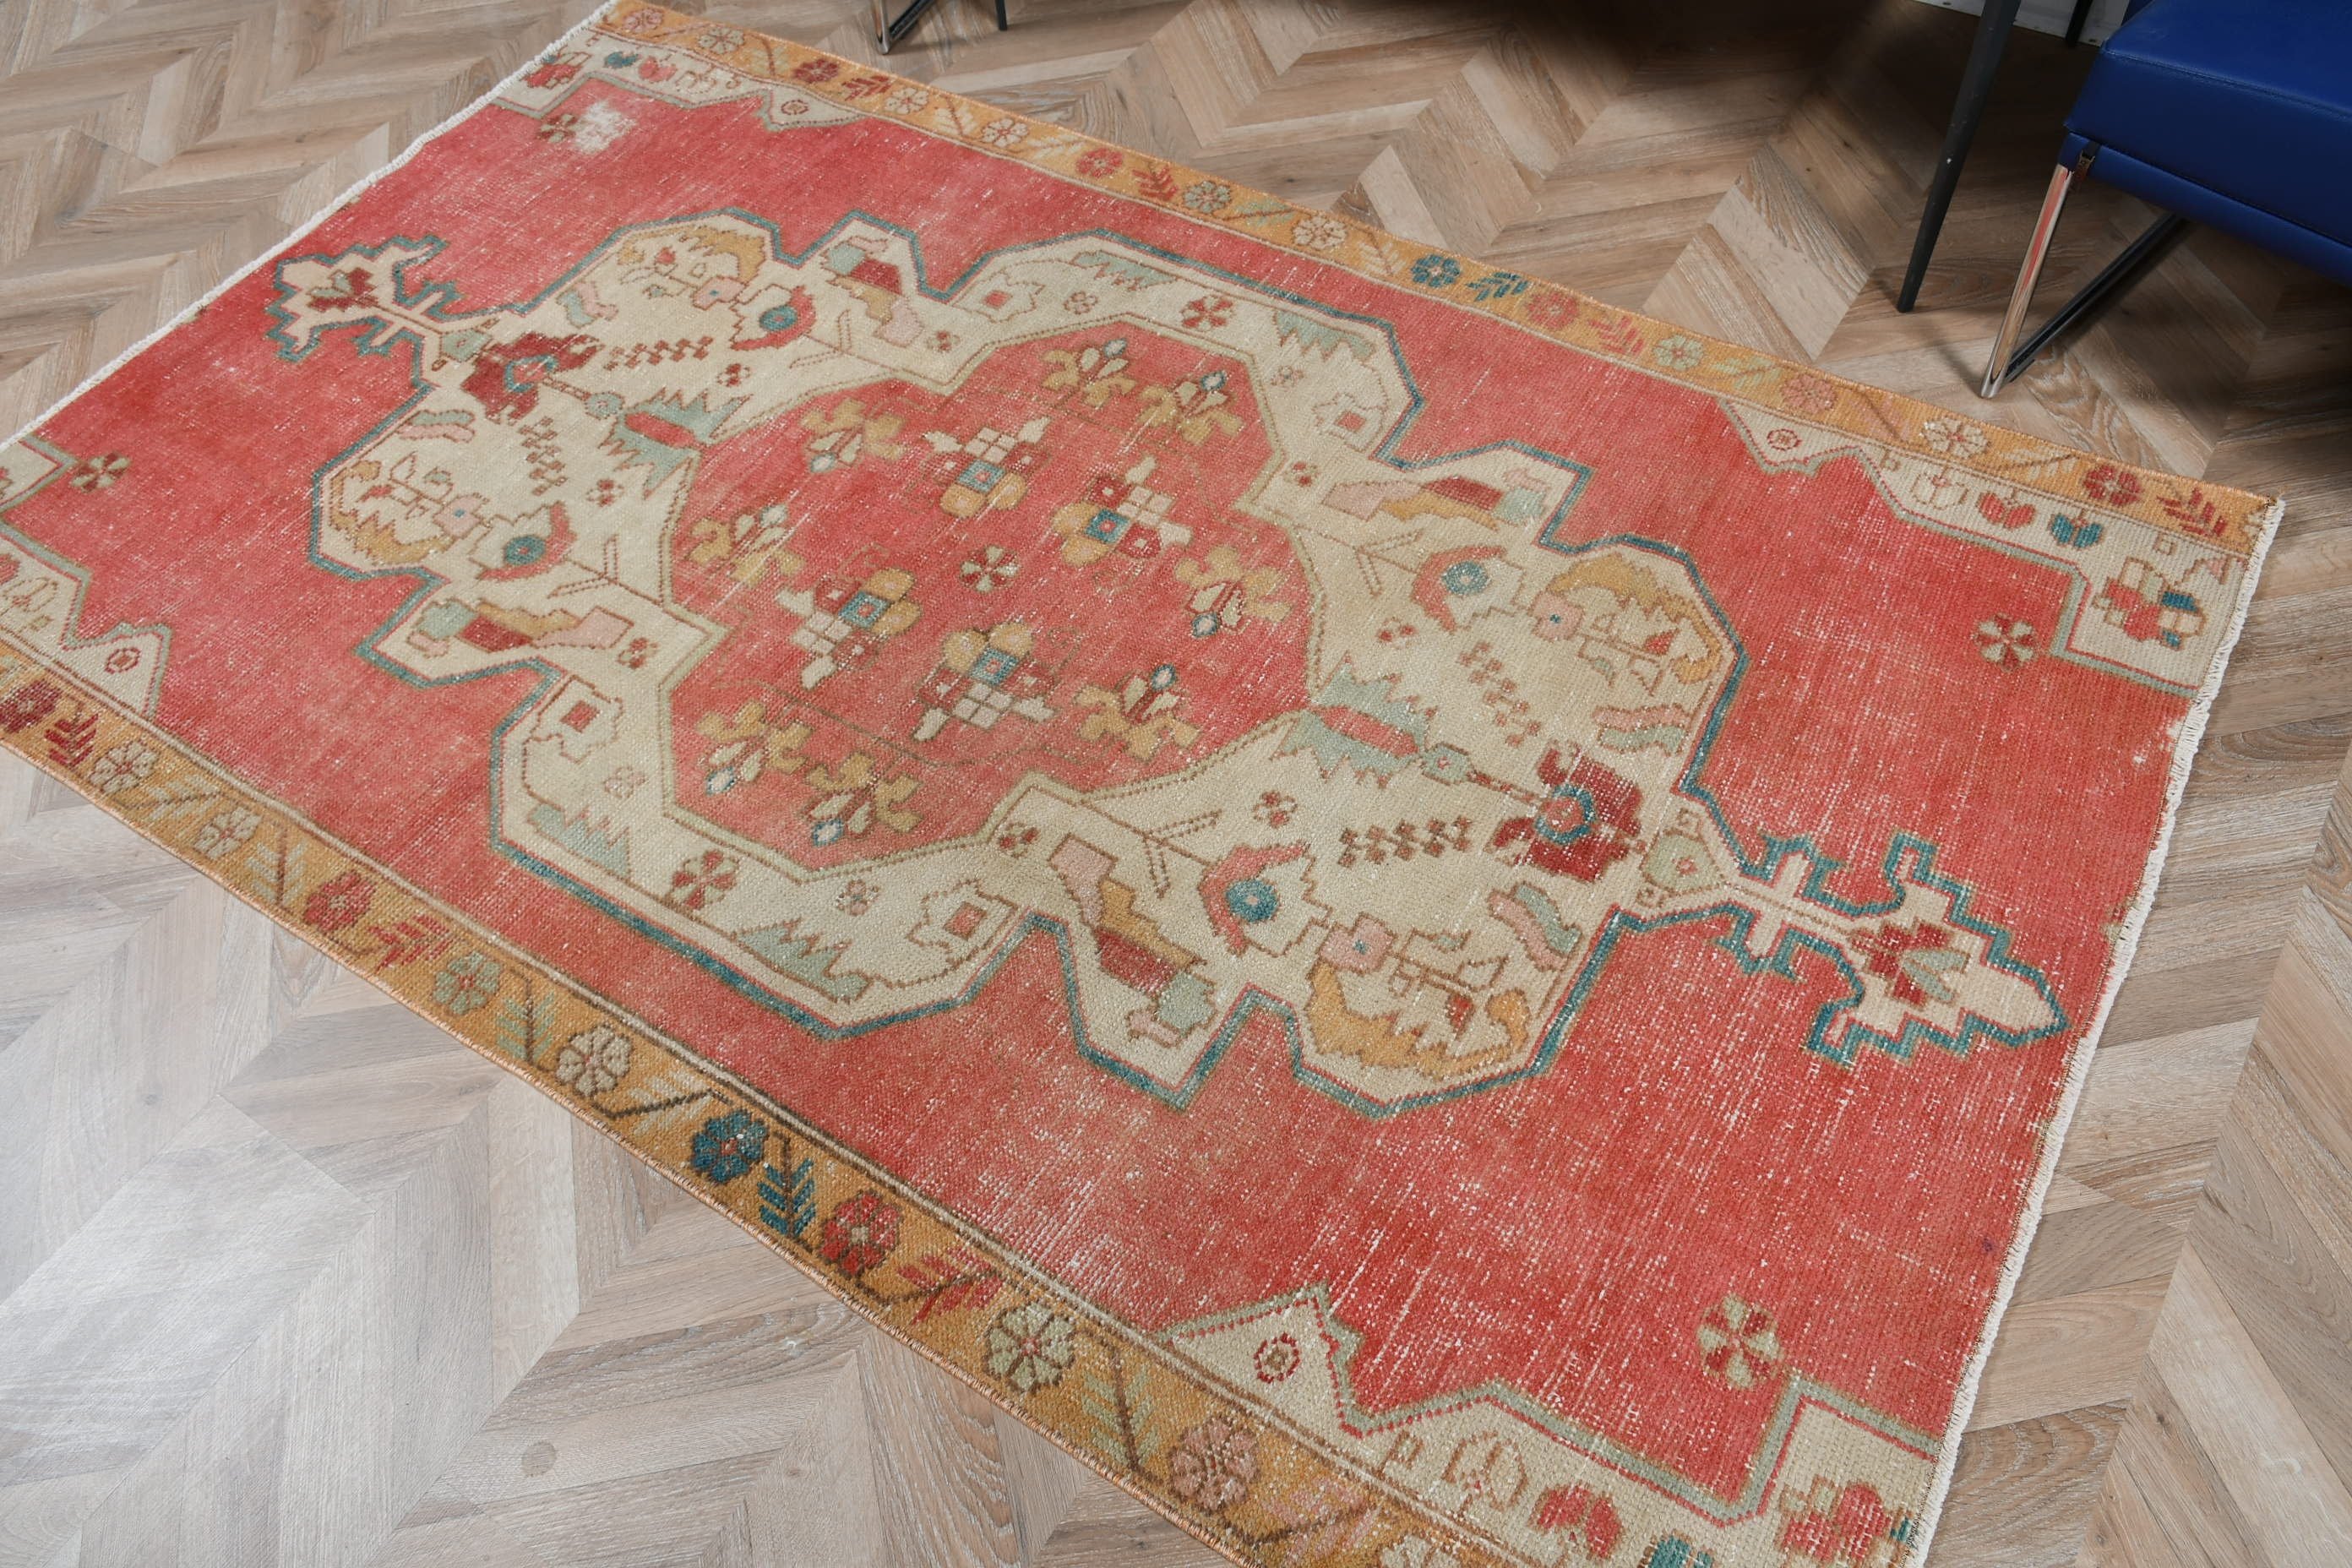 Nursery Rug, Antique Rug, Turkish Rugs, Rugs for Dining Room, Abstract Rug, Wool Rug, 4.3x6.9 ft Area Rug, Red Kitchen Rugs, Vintage Rugs